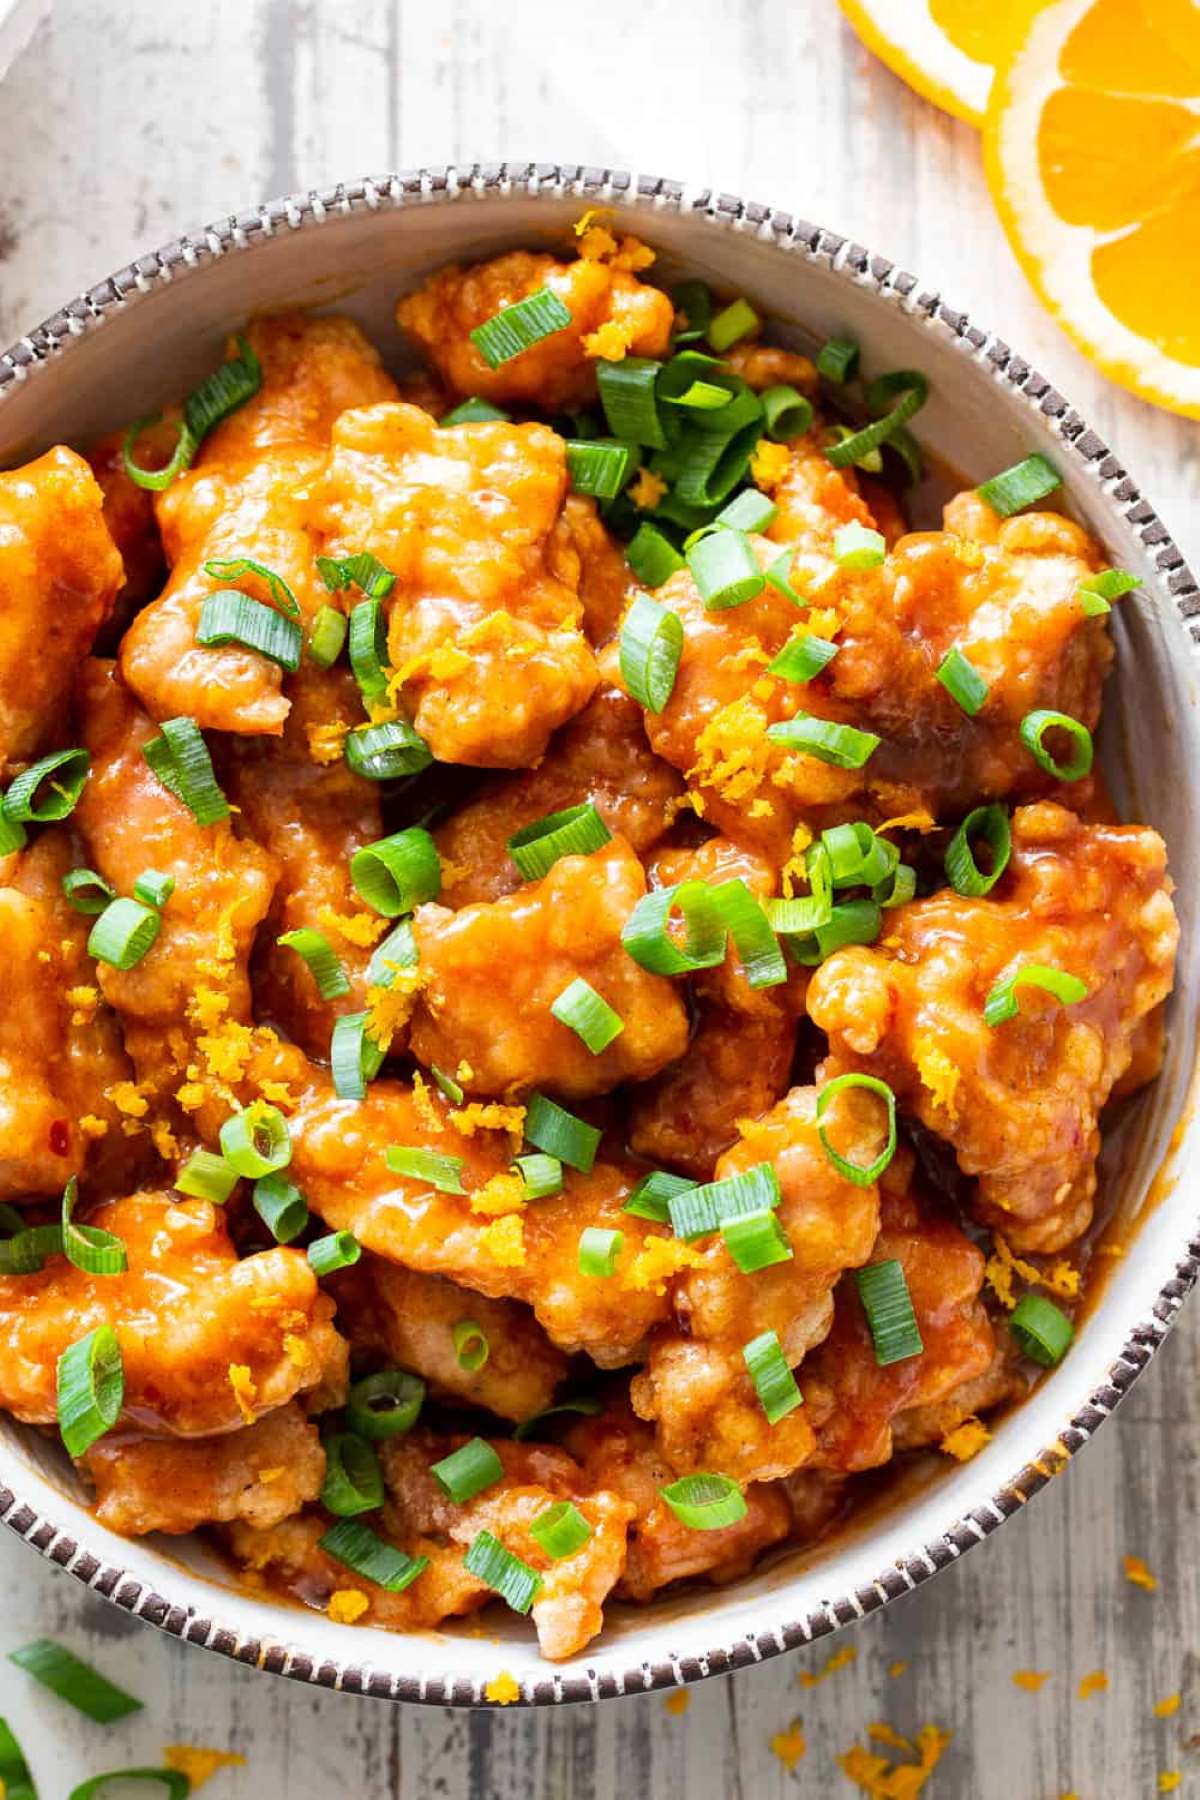 Celebrate Chinese New Year With Delicious Orange Chicken